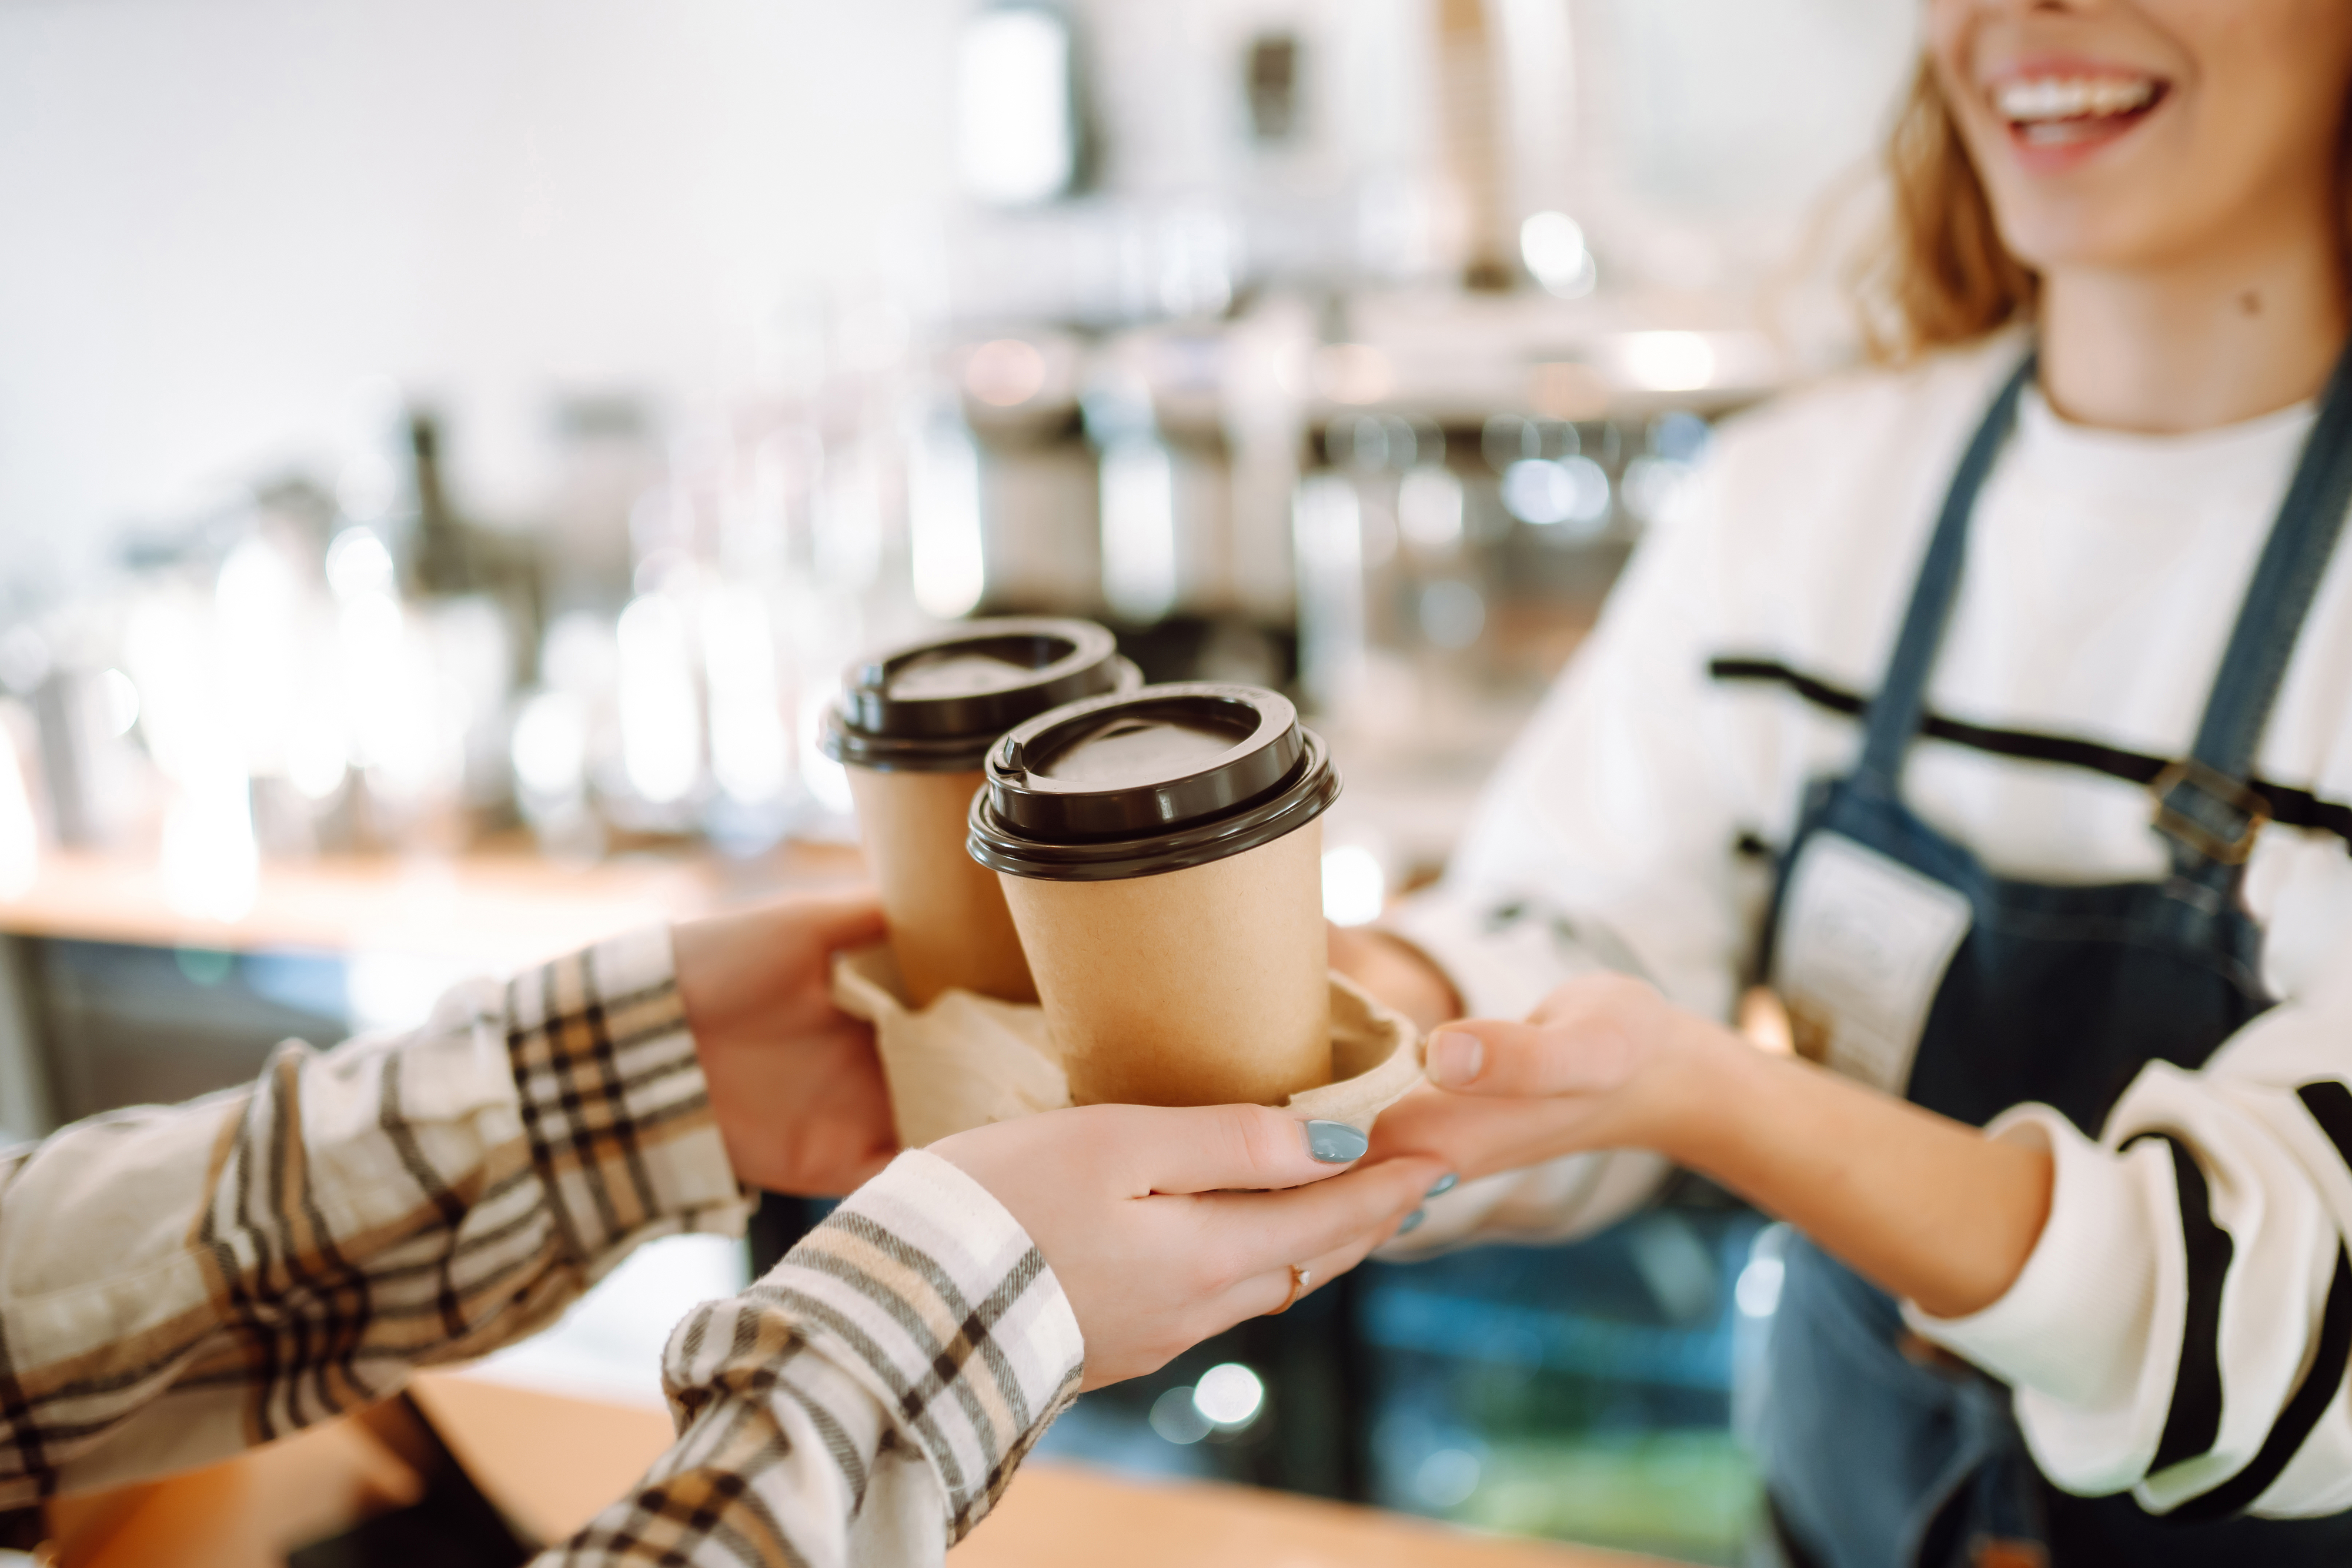 Barista in an apron handing two coffee cups to a customer&#x27;s outstretched hands